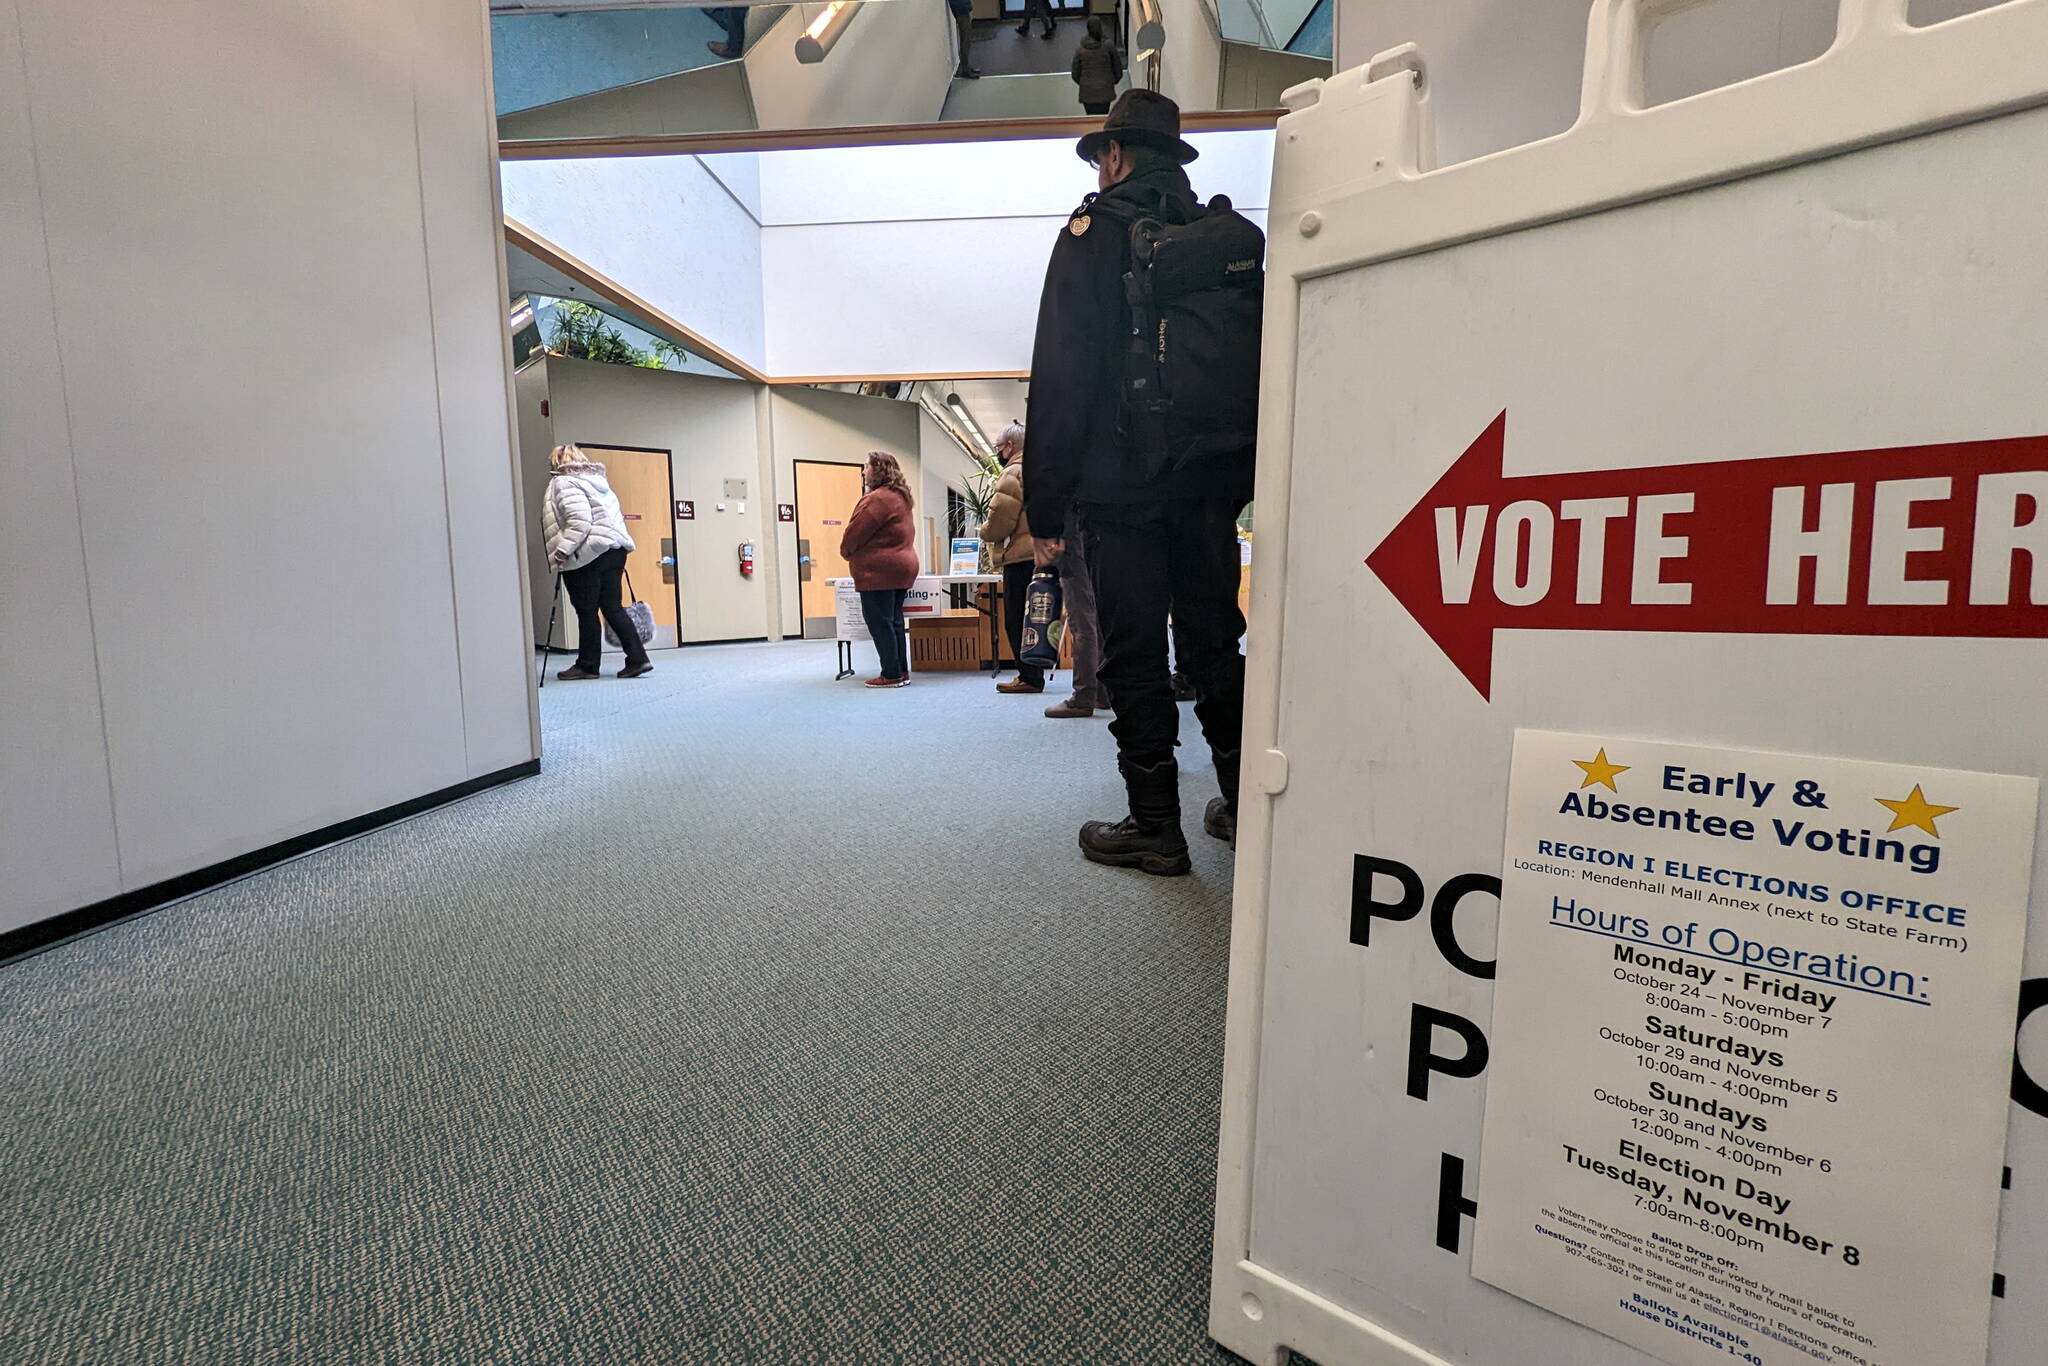 A sign directs early voters to the polling station at the Mendenhall Mall on Monday. The mall is one of two early voting locations in Juneau, but more than a dozen polling locations will be open from 7 a.m. to 8 p.m. on Tuesday. (Ben Hohenstatt / Juneau Empire)